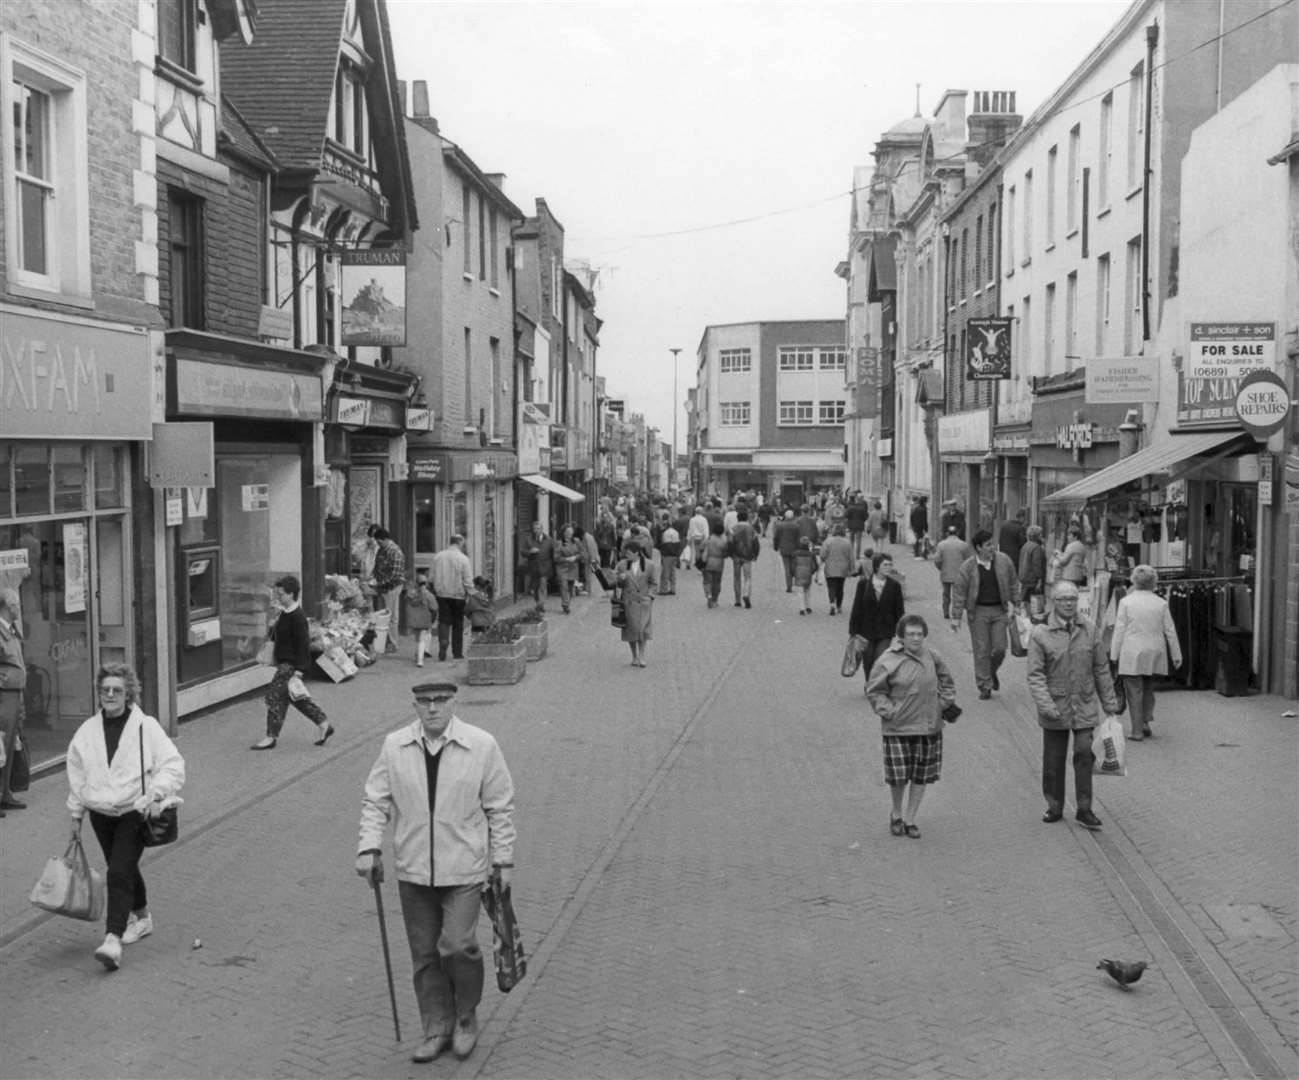 Gravesend town centre pictured in 1991